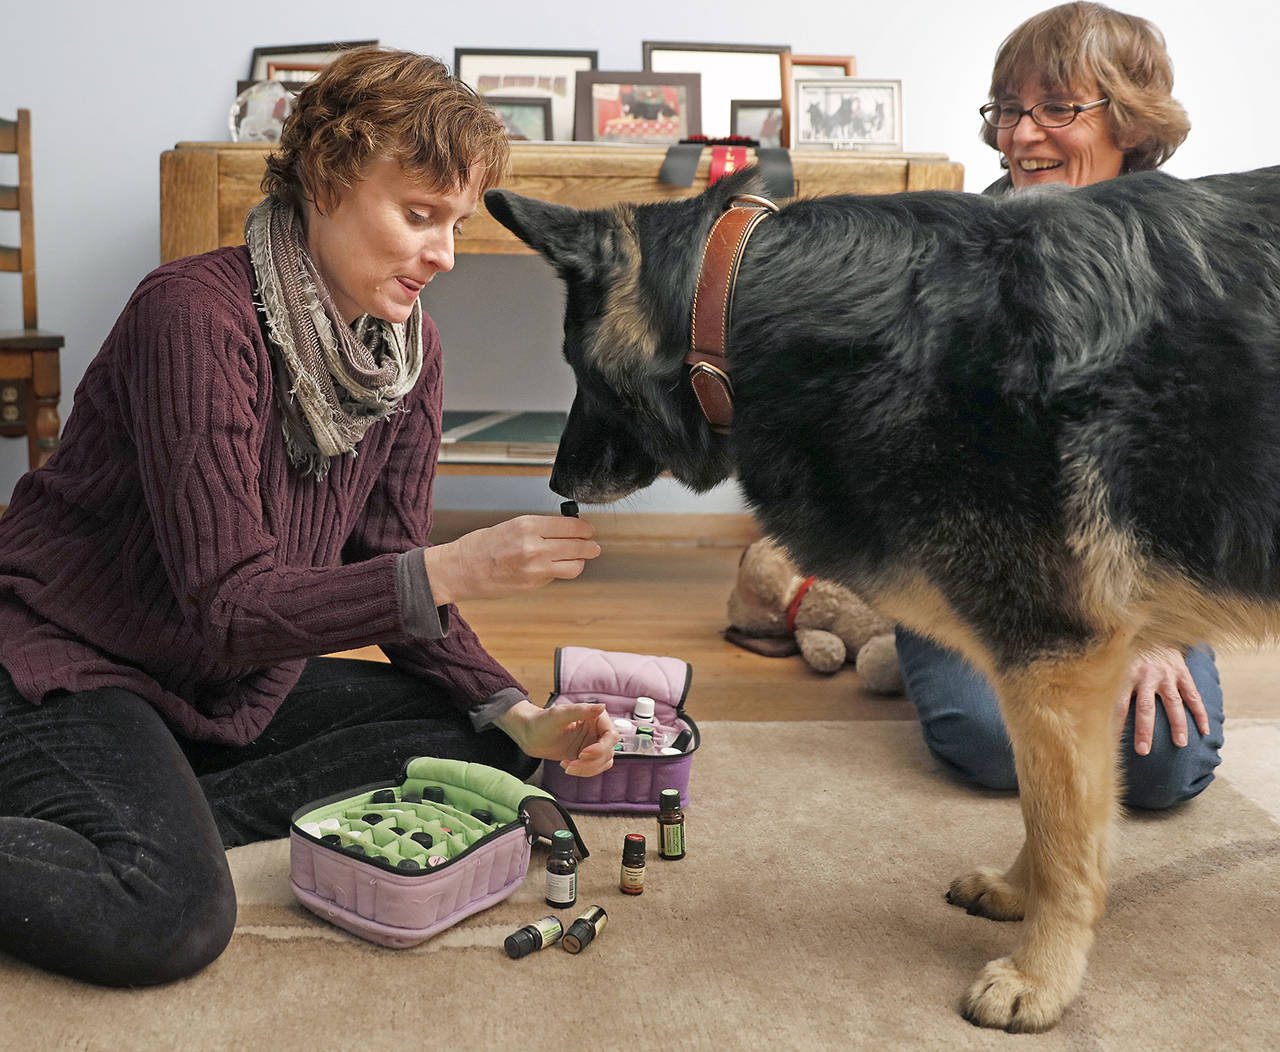 Tom Wallace | Minneapolis Star Tribune                                 Amy Williams Delong conducts a dog aromatherapy session with client Julie Northenscold and her dog Izzy, finding the scents of cinnamon and ginger were her favorites. The dog will select the scents it likes, and she’ll mix a fragrance accordingly.